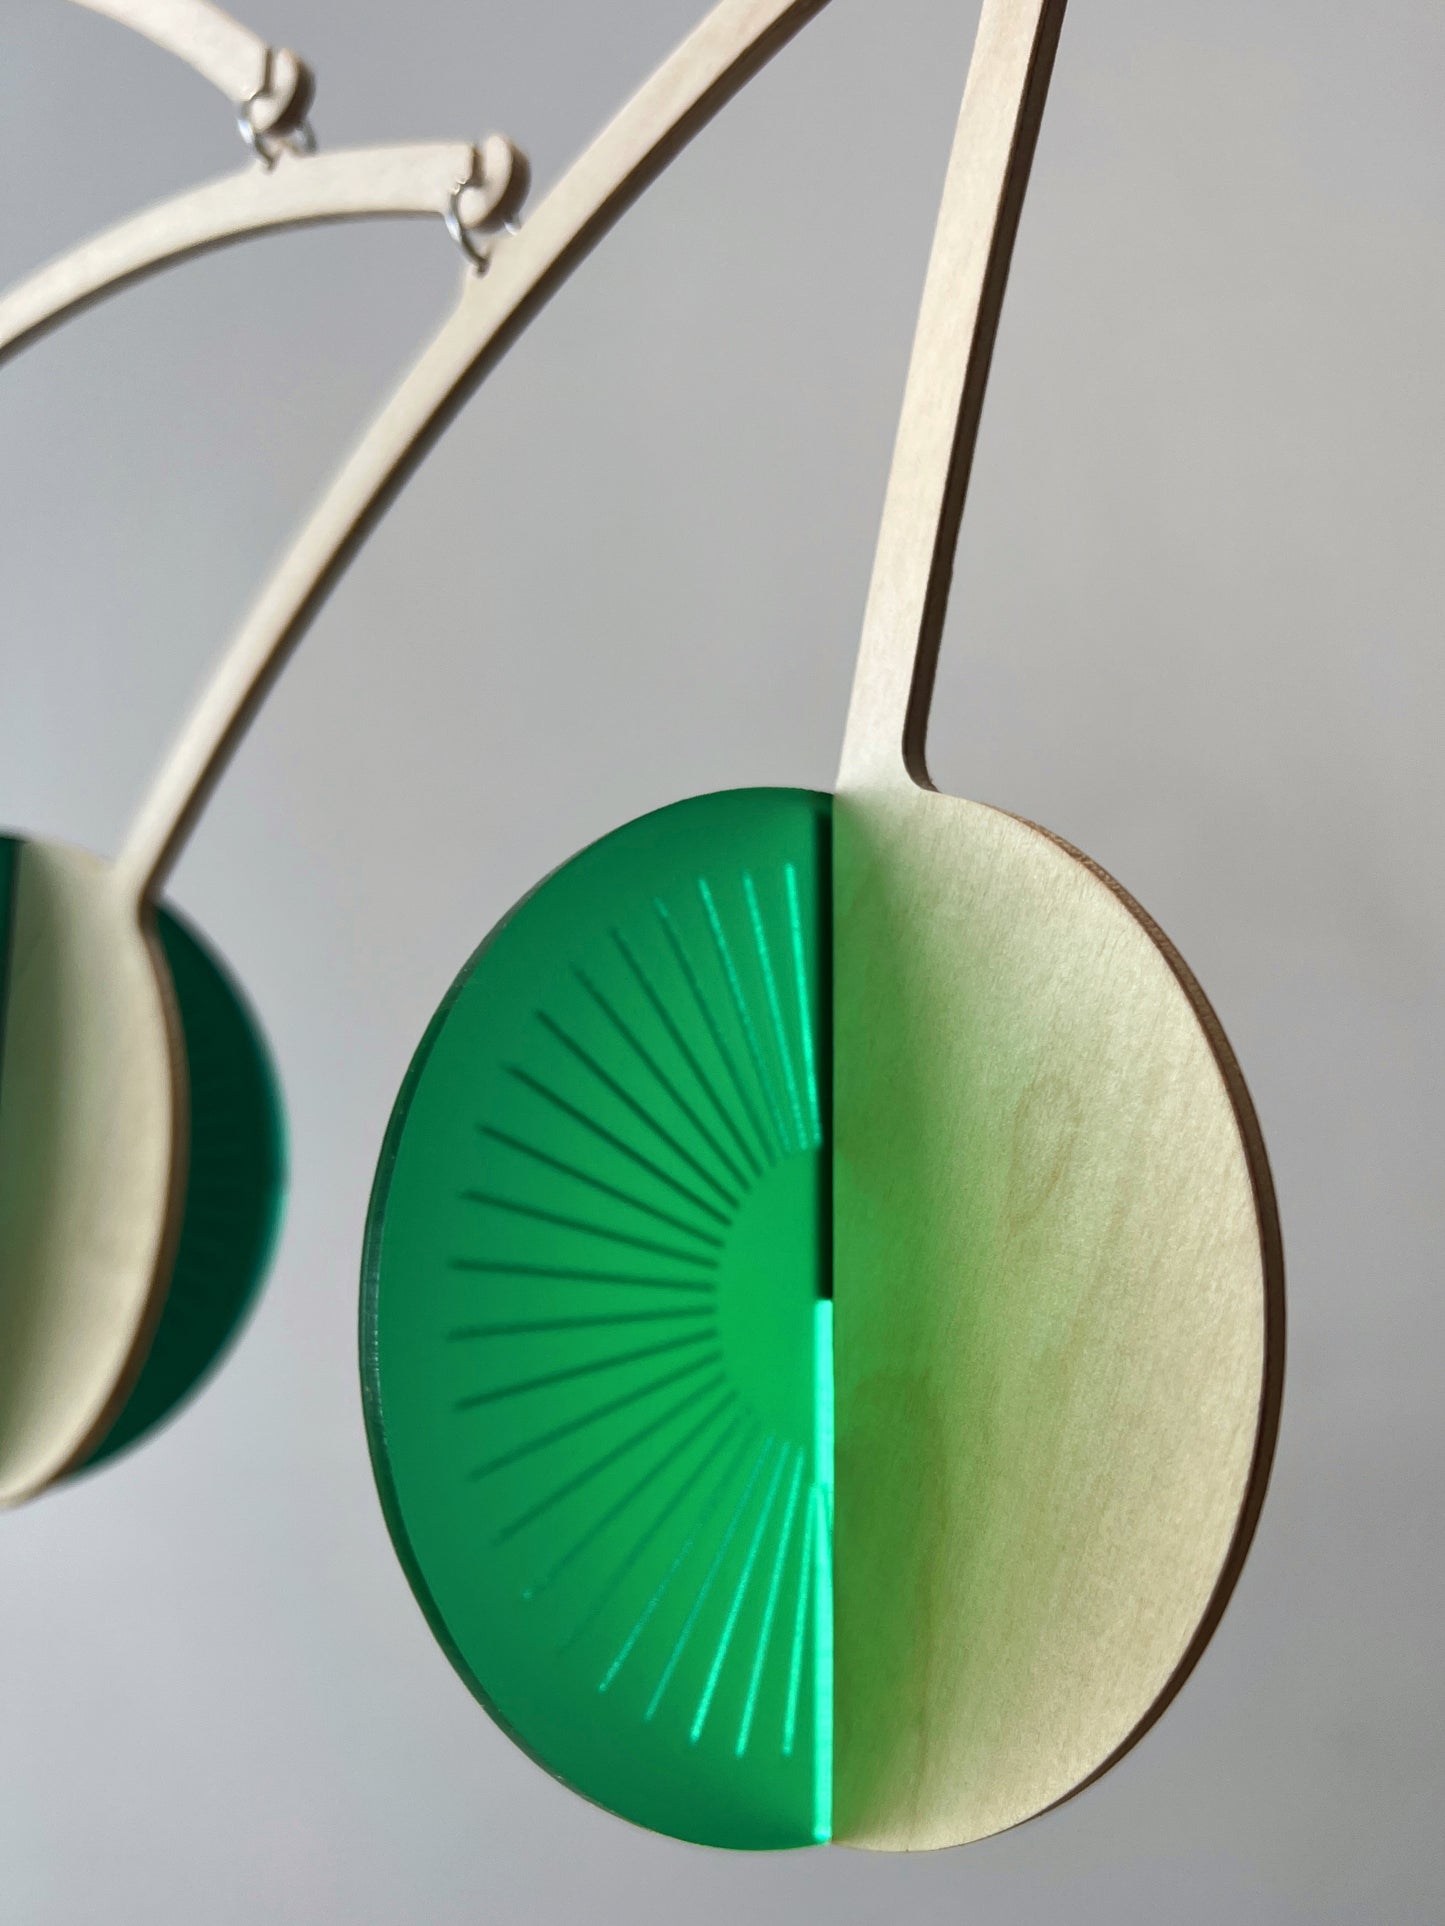 Green mobile, wooden mobile, handmade mobile. Calder mobile, mobile and Baby mobile. Moon Mobile, vintage mobile and kinetic mobile. Abstract Art, Hanging Mobile and Kinetic Mobile. Modern Mobile. Mid Century Modern and Hanging Sculpture, retro mobile